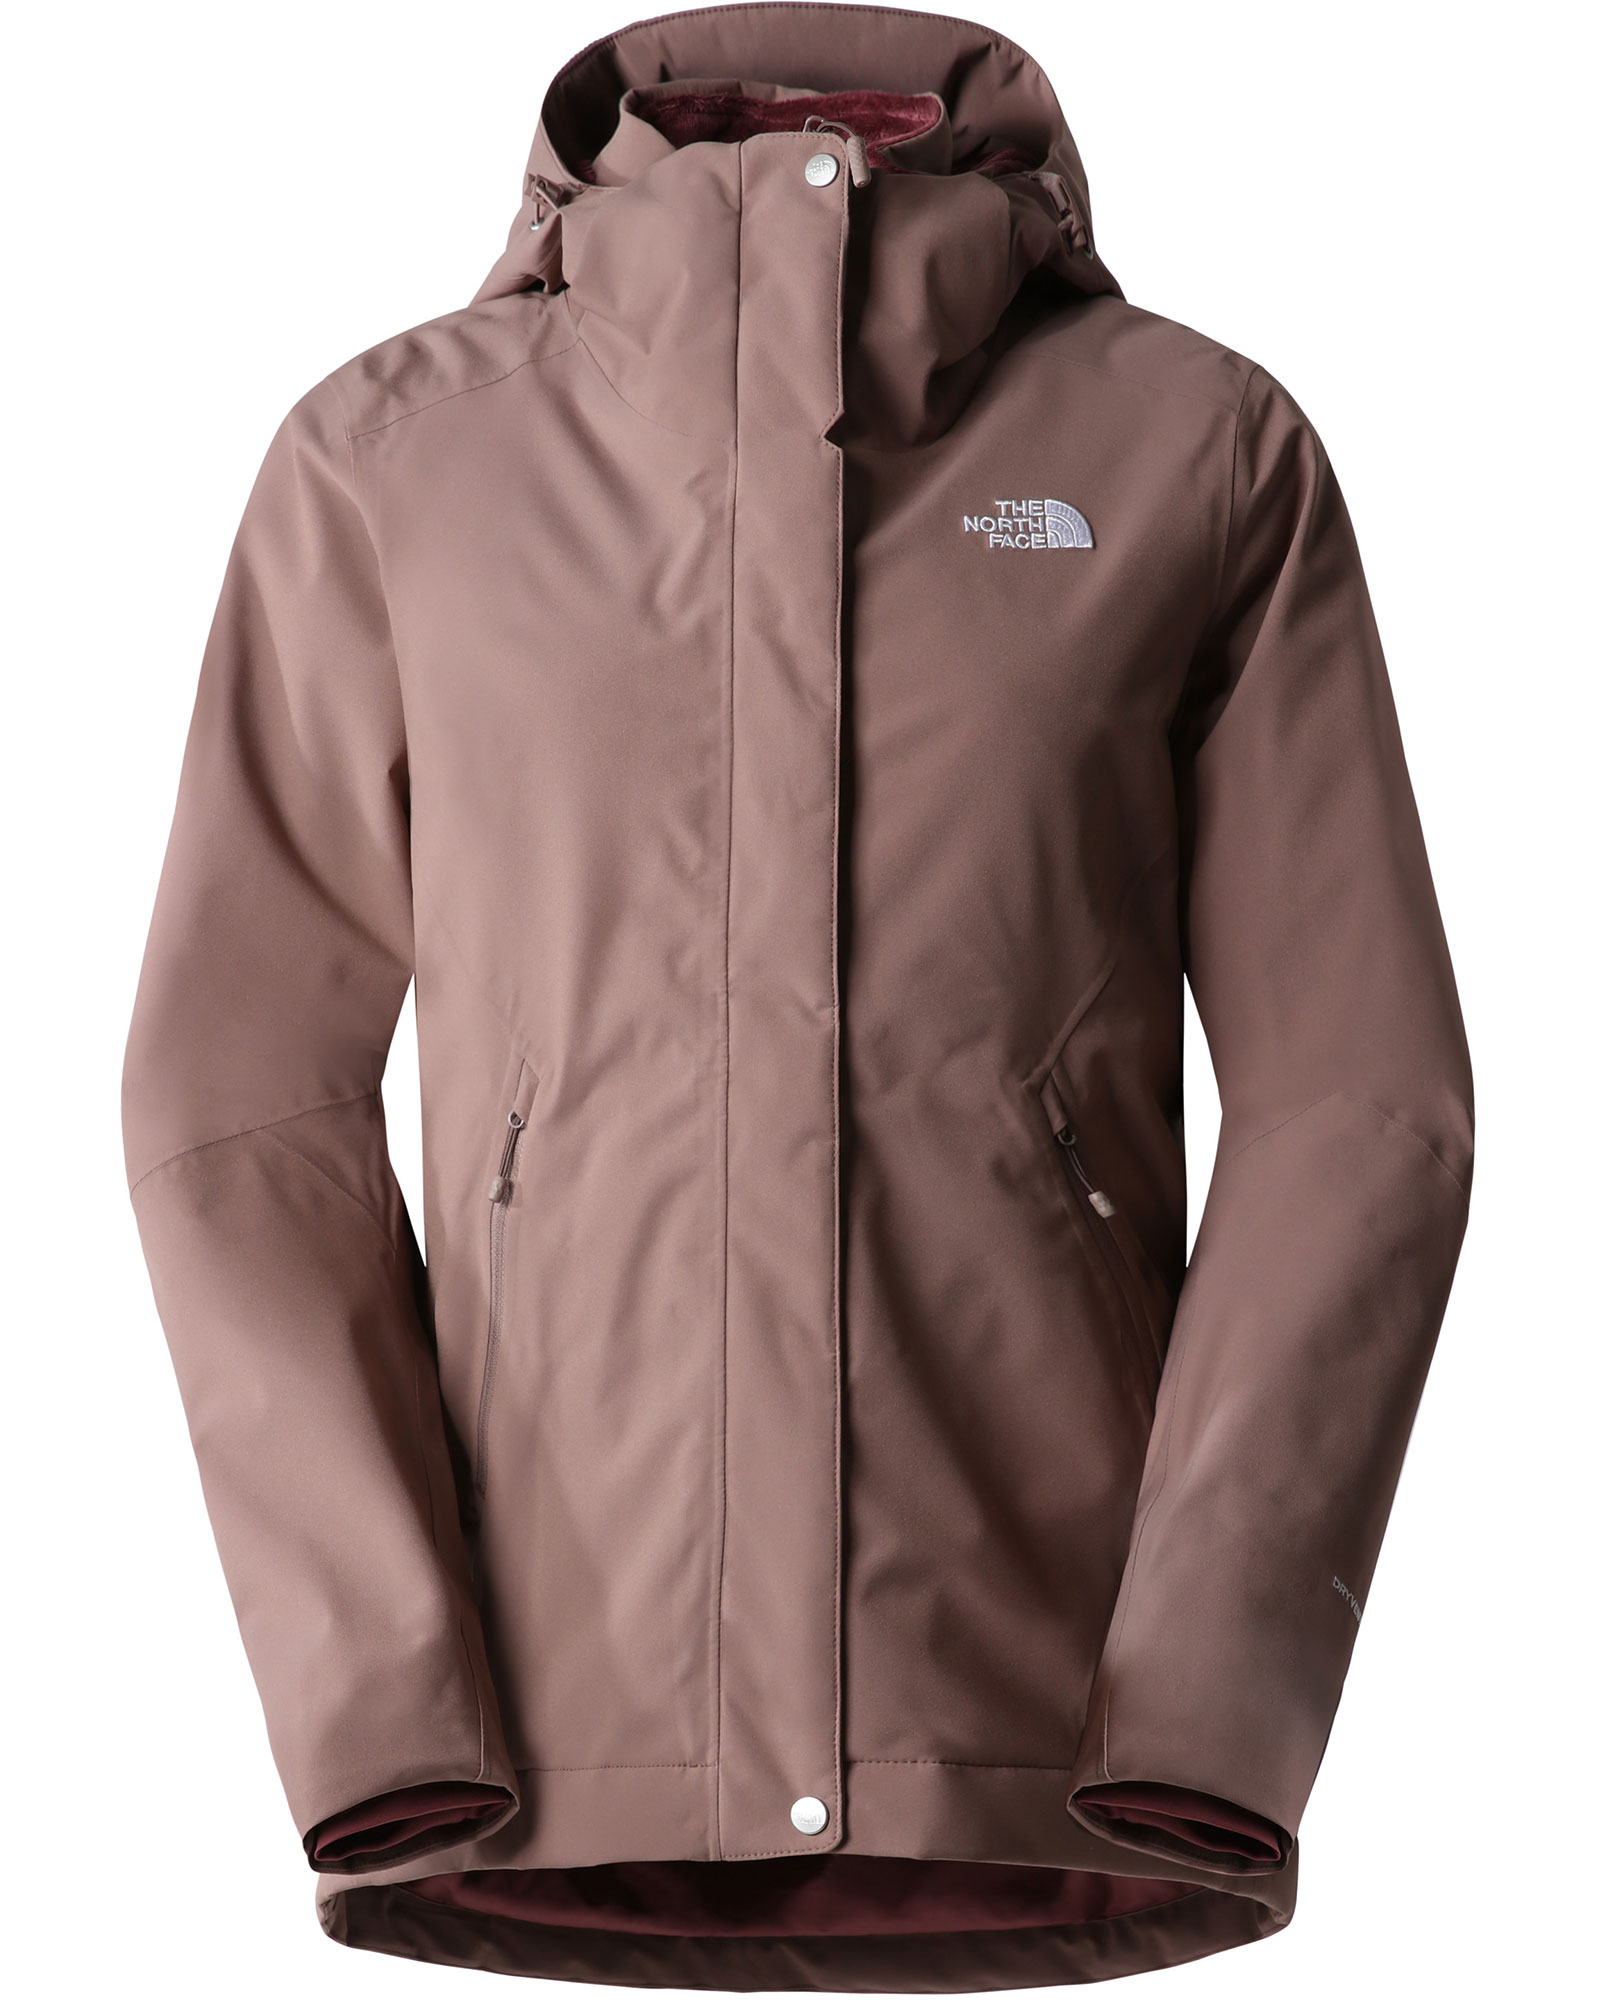 The North Face Inlux Insulated DryVent Women’s Insulated Jacket - Deep Taupe L